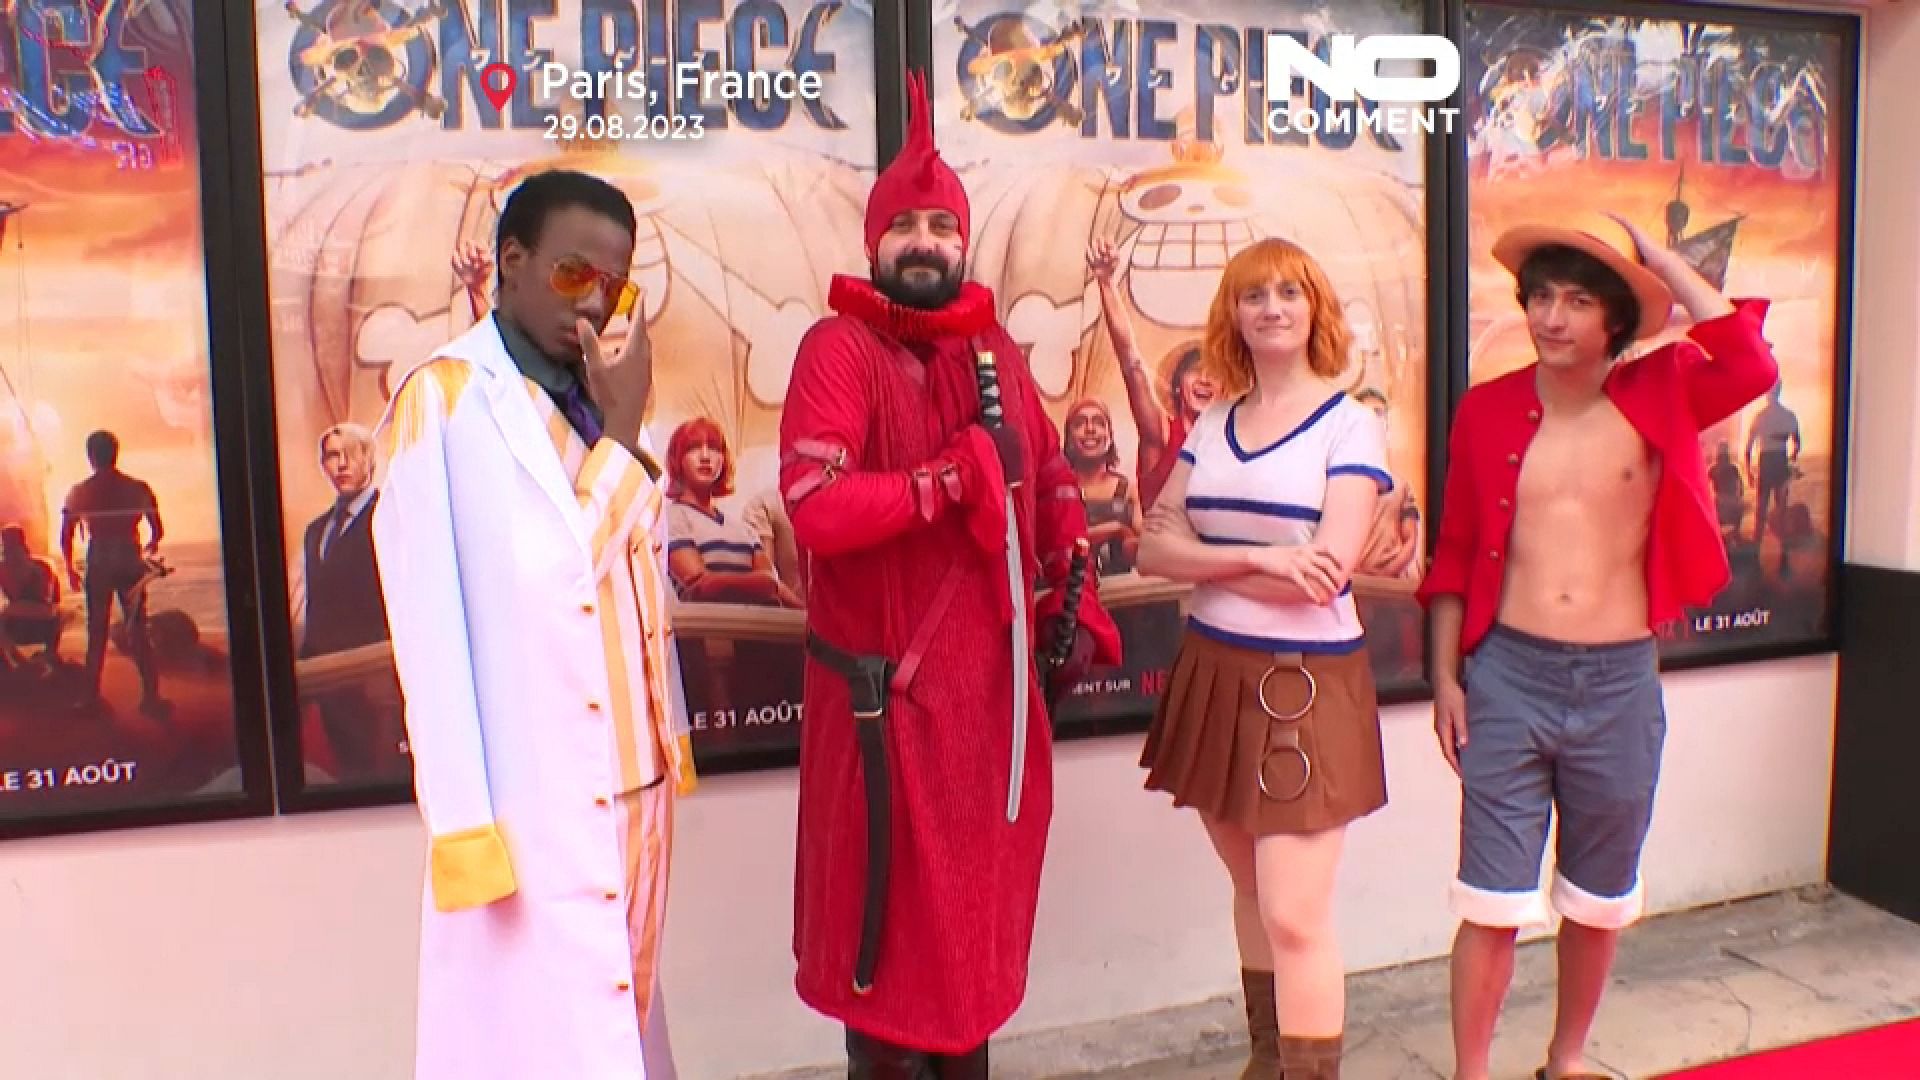 Watch: Fans of the famous Japanese manga 'One Piece' flock to see